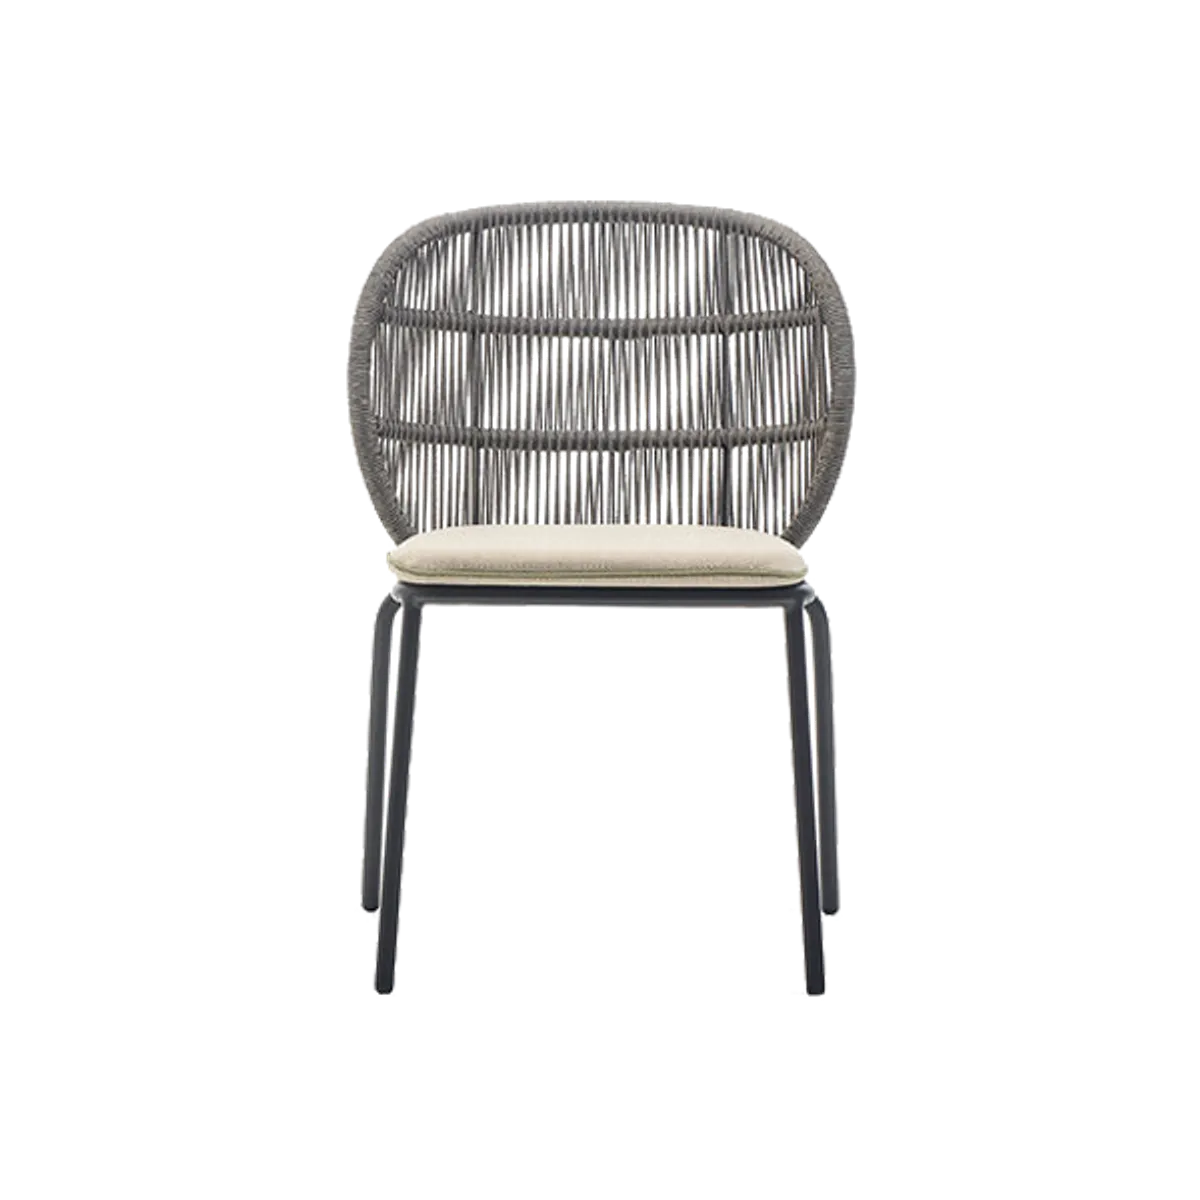 Krayon Chair Inside Out Contracts